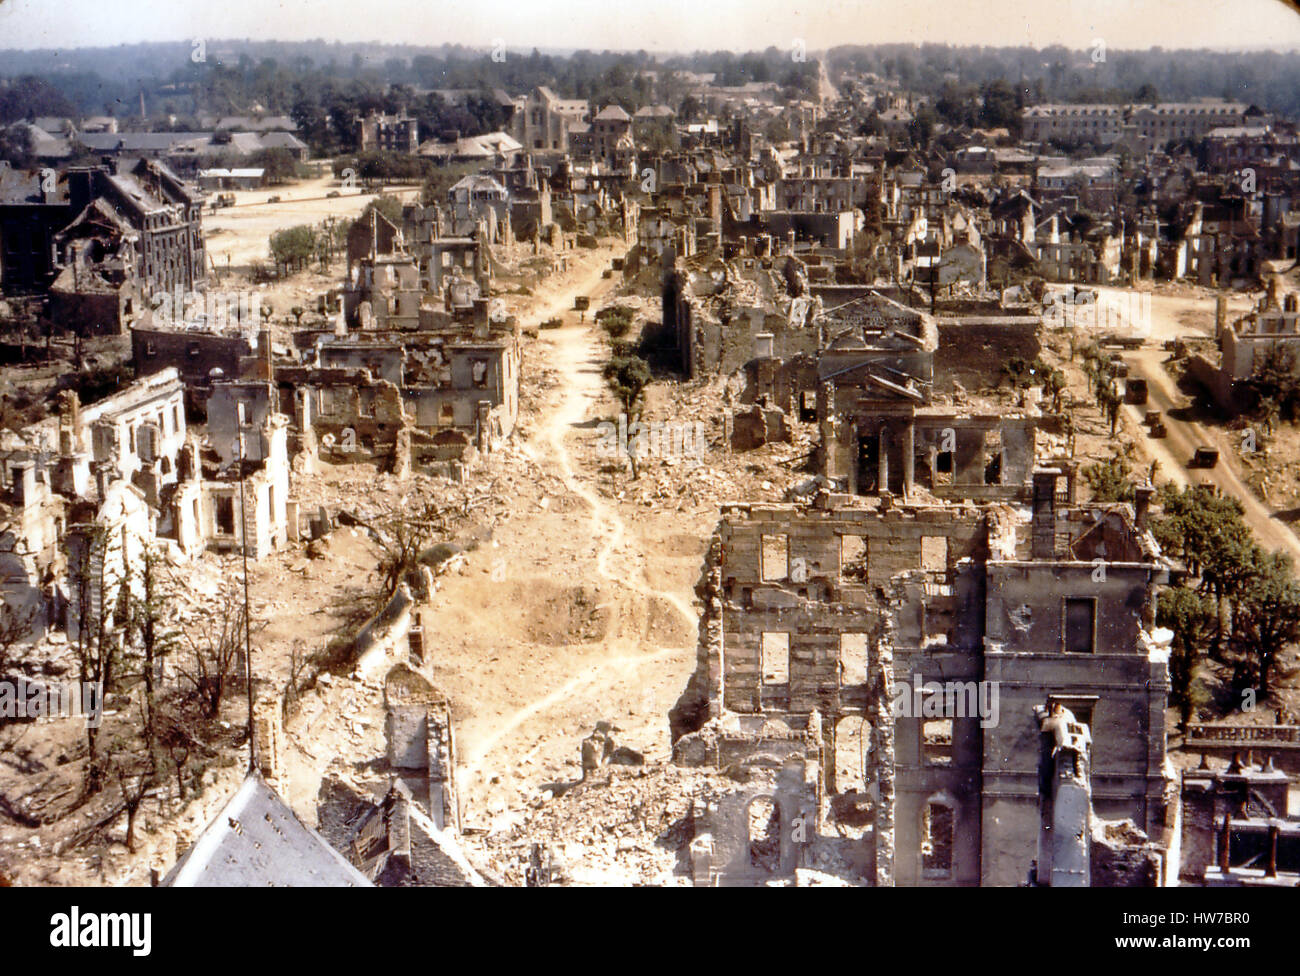 Normandy, France, June 1944. Villages and city in ruins after the bombing and fighting, World War II Stock Photo